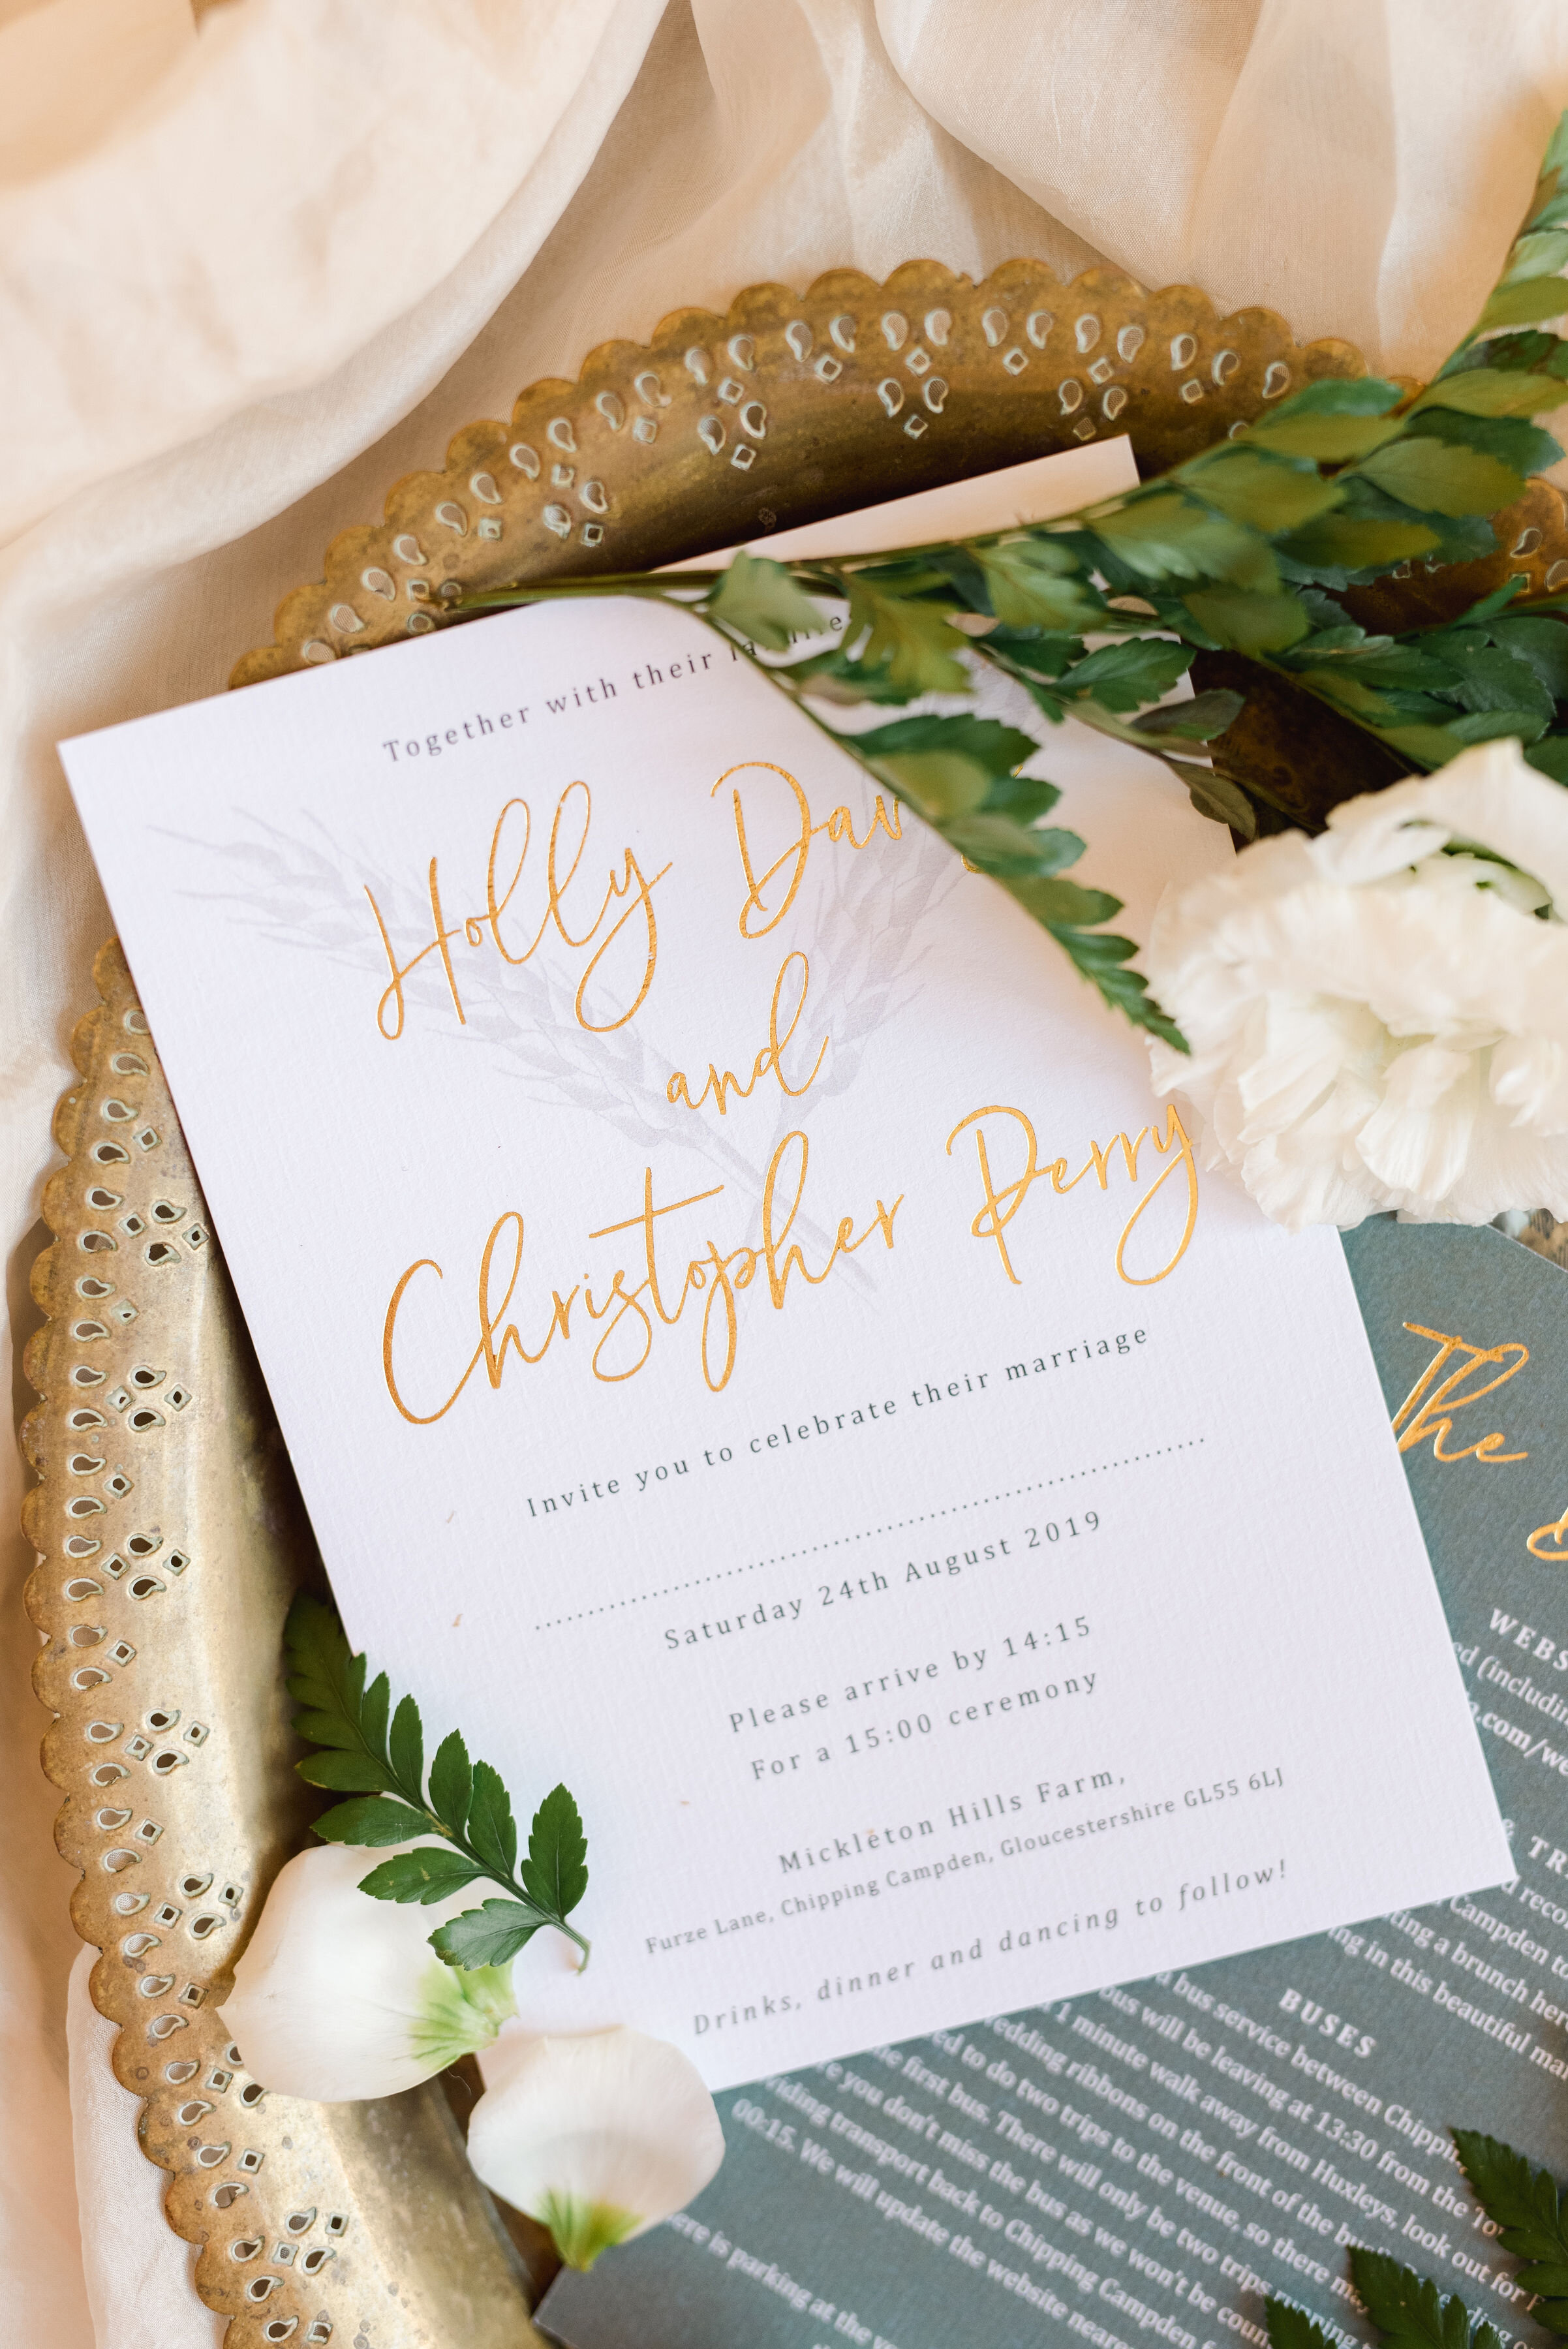 Rustic Elegance Wedding Invitations with Gold Foiling